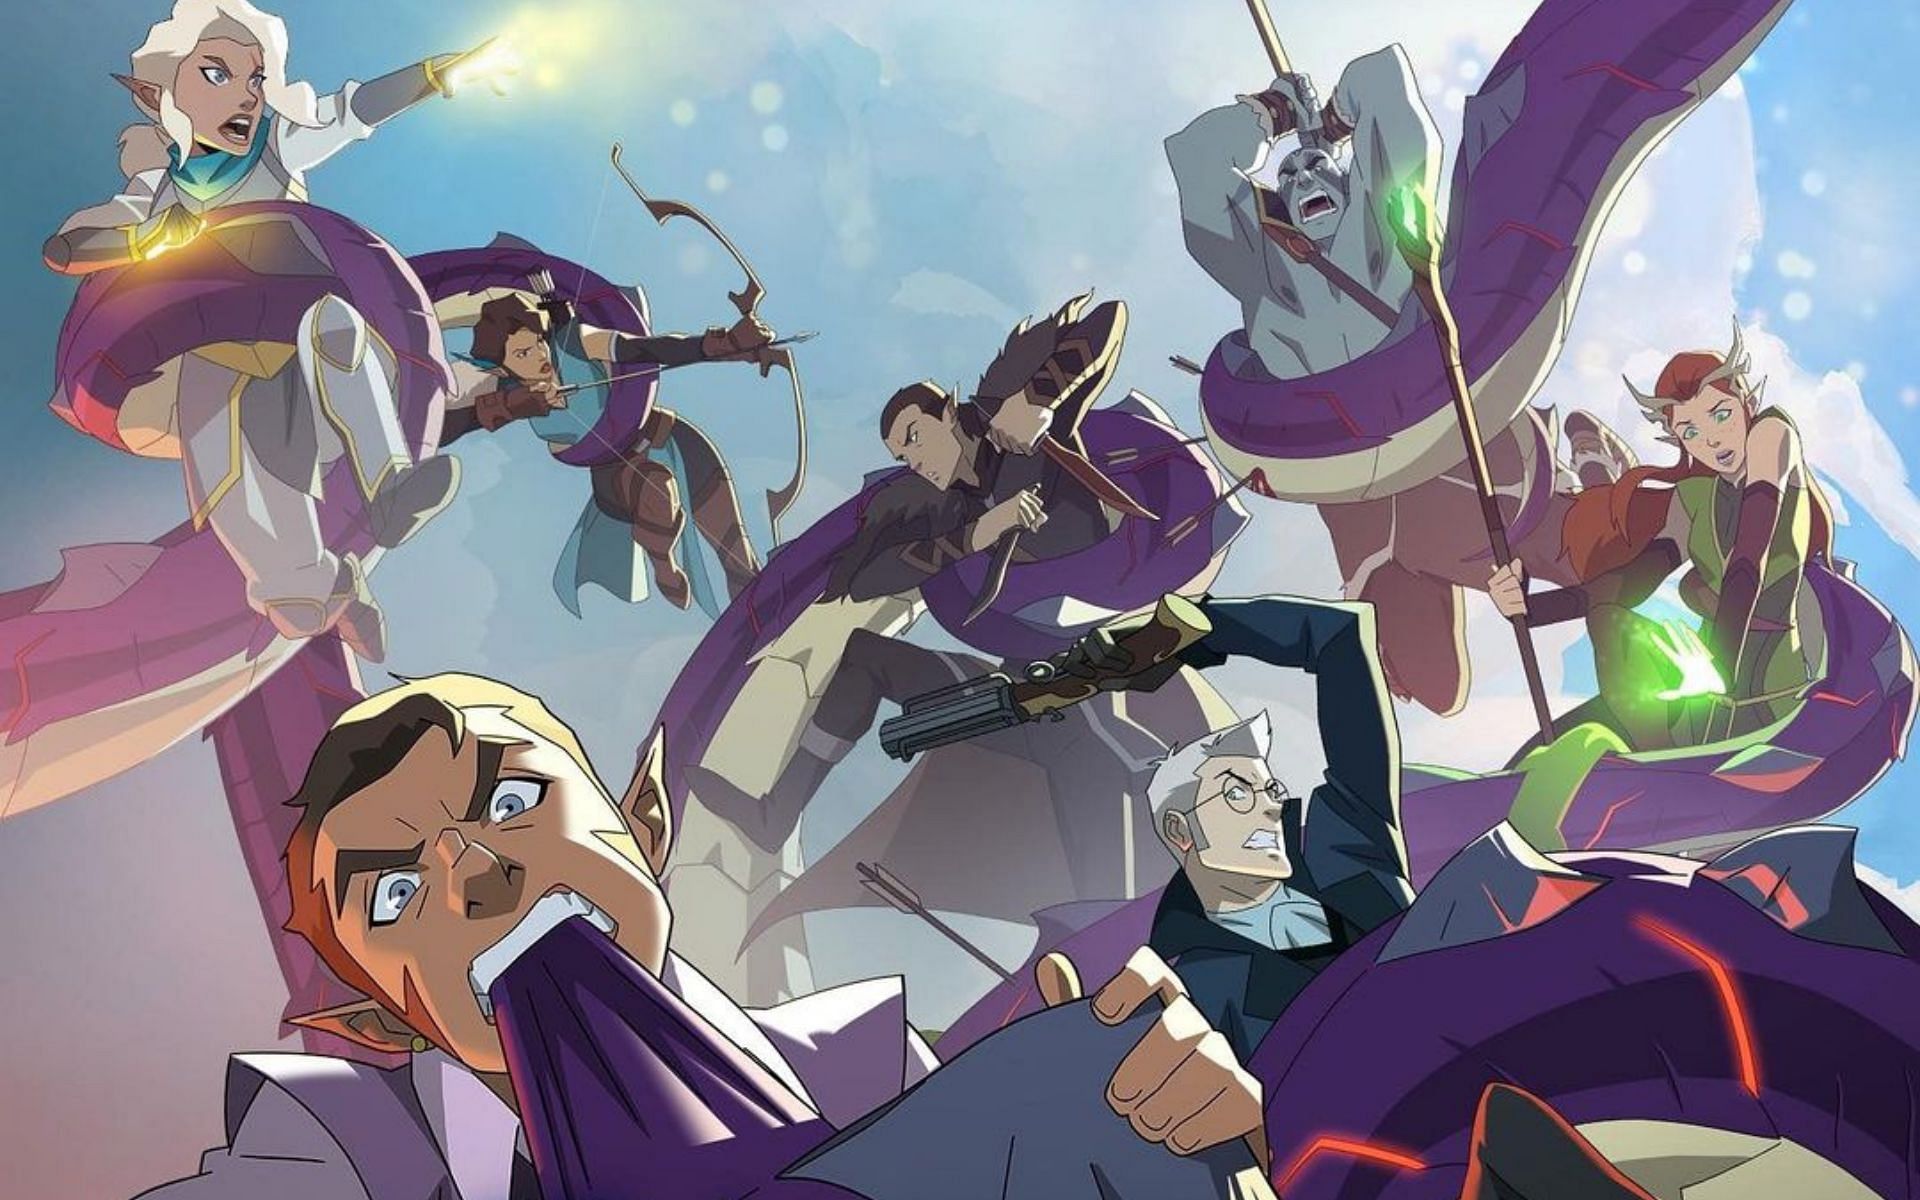 &#039;The Legend of Vox Machina&#039;: An adult fantasy animated series (Via critical_role @Instagram)